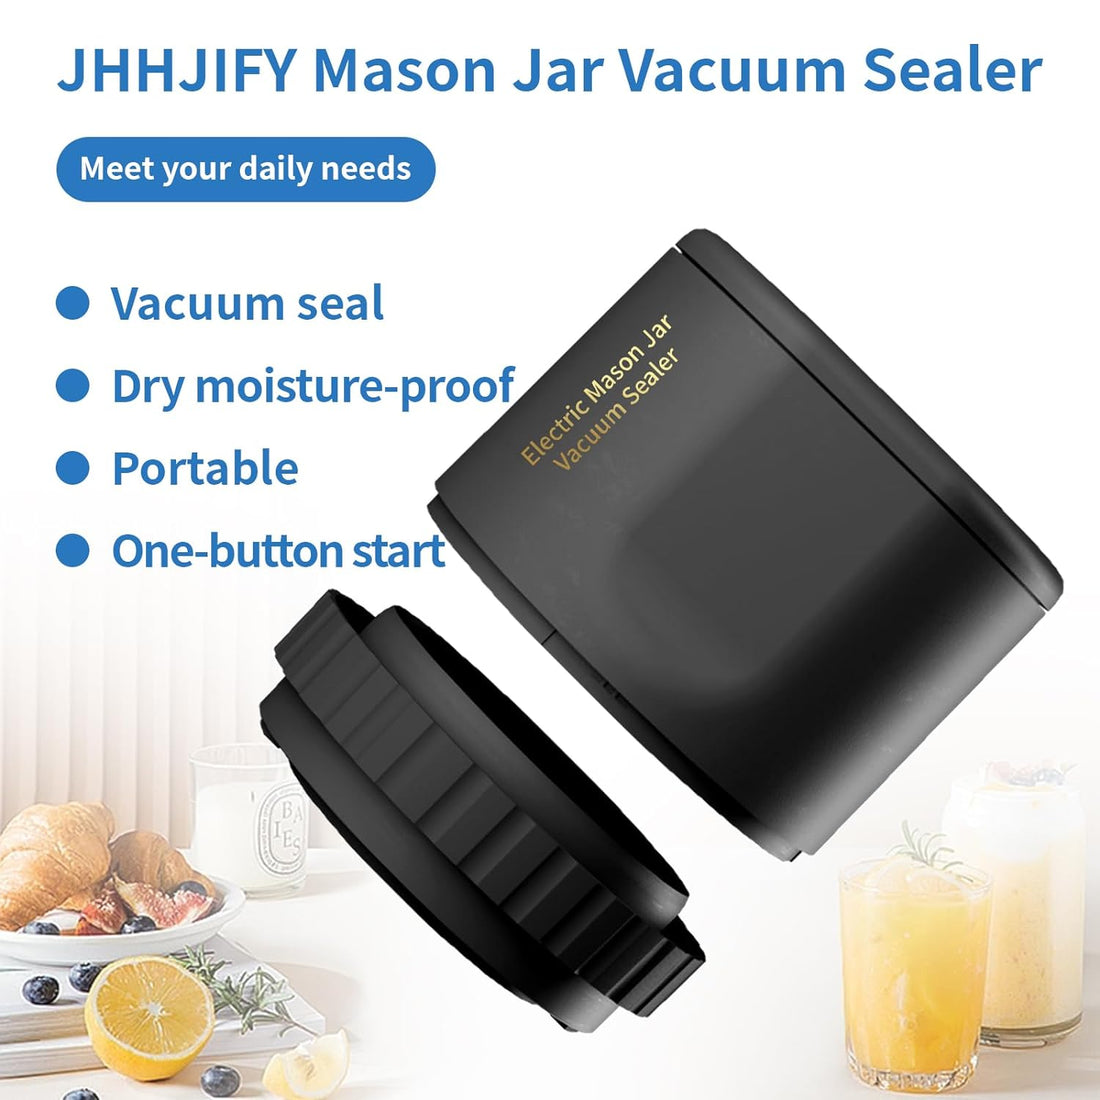 JHHJIFY Electric Mason Jar Vacuum Sealer, Strong Suction Vacuum Sealer for Canning Mason Jars with Wide & Regular Mouth, Vacuum Sealing Machine for Food Storage and Fermentation